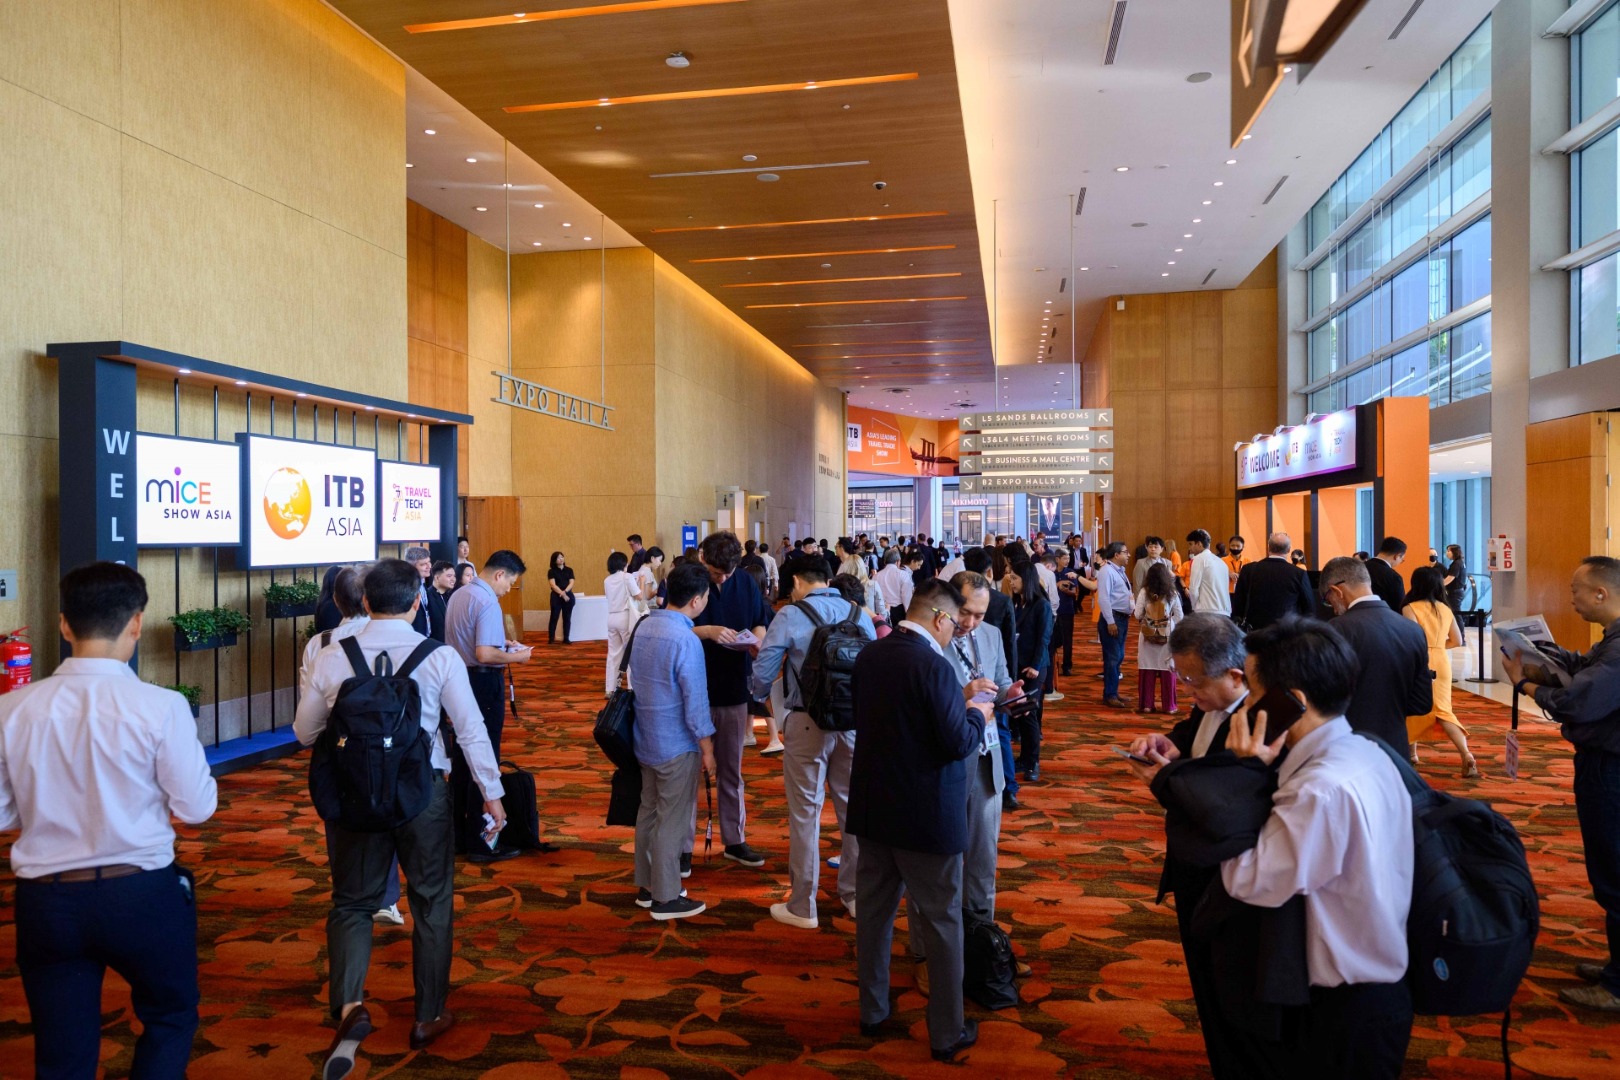 ITB Asia promises 3 days of unparalleled networking and business opportunities